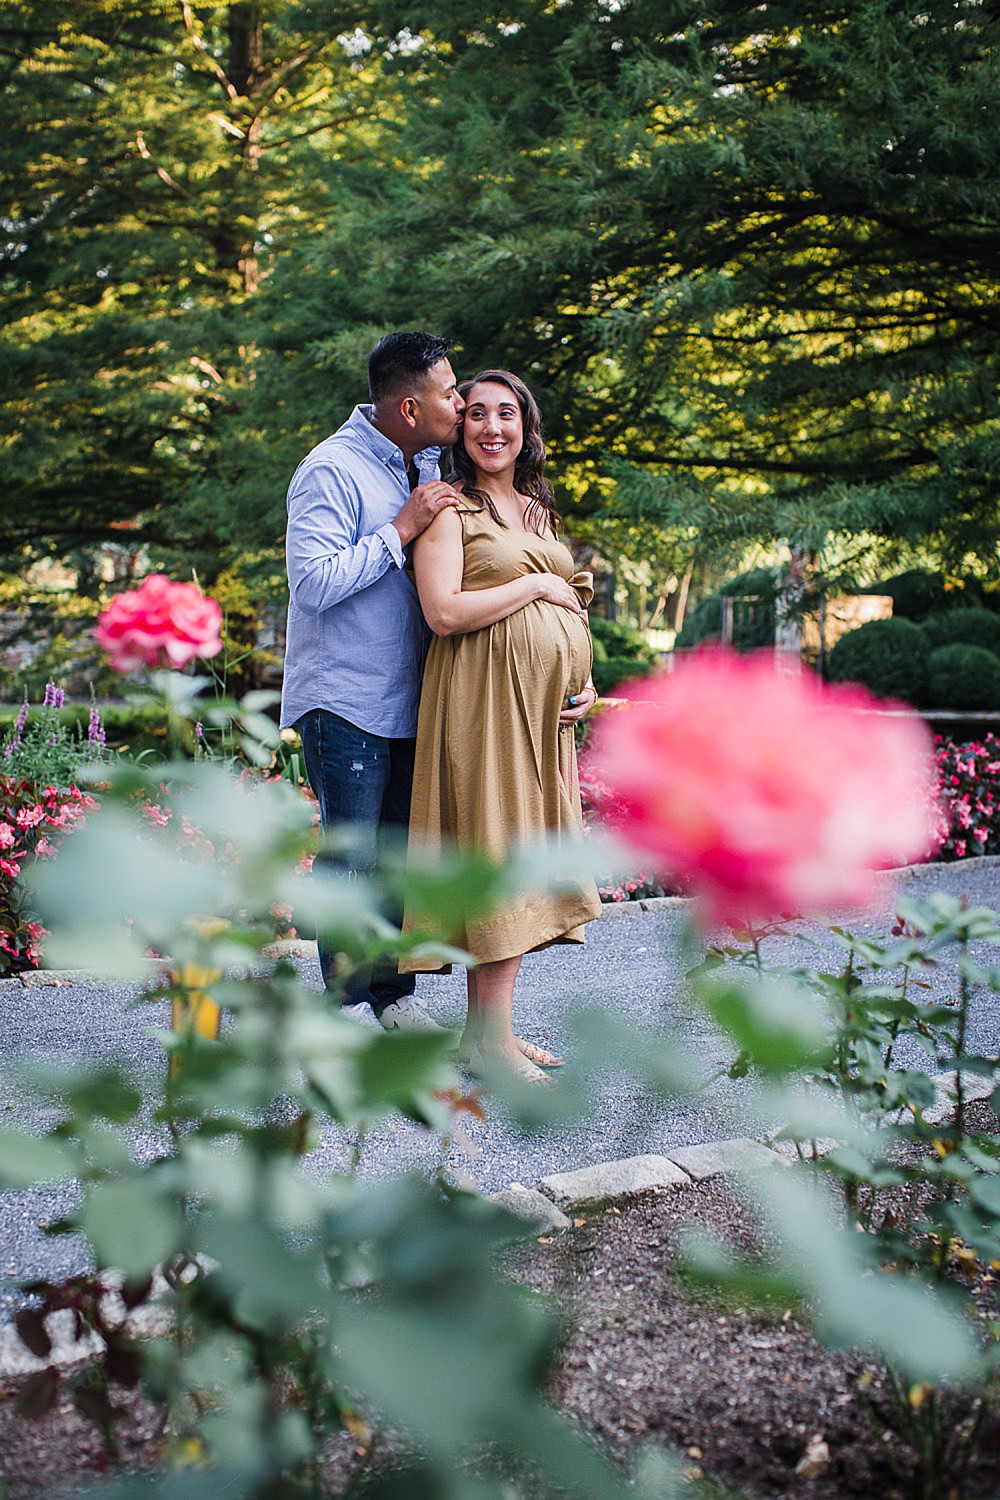 Conestoga House and Gardens Summer Maternity Session in Lancaster PA